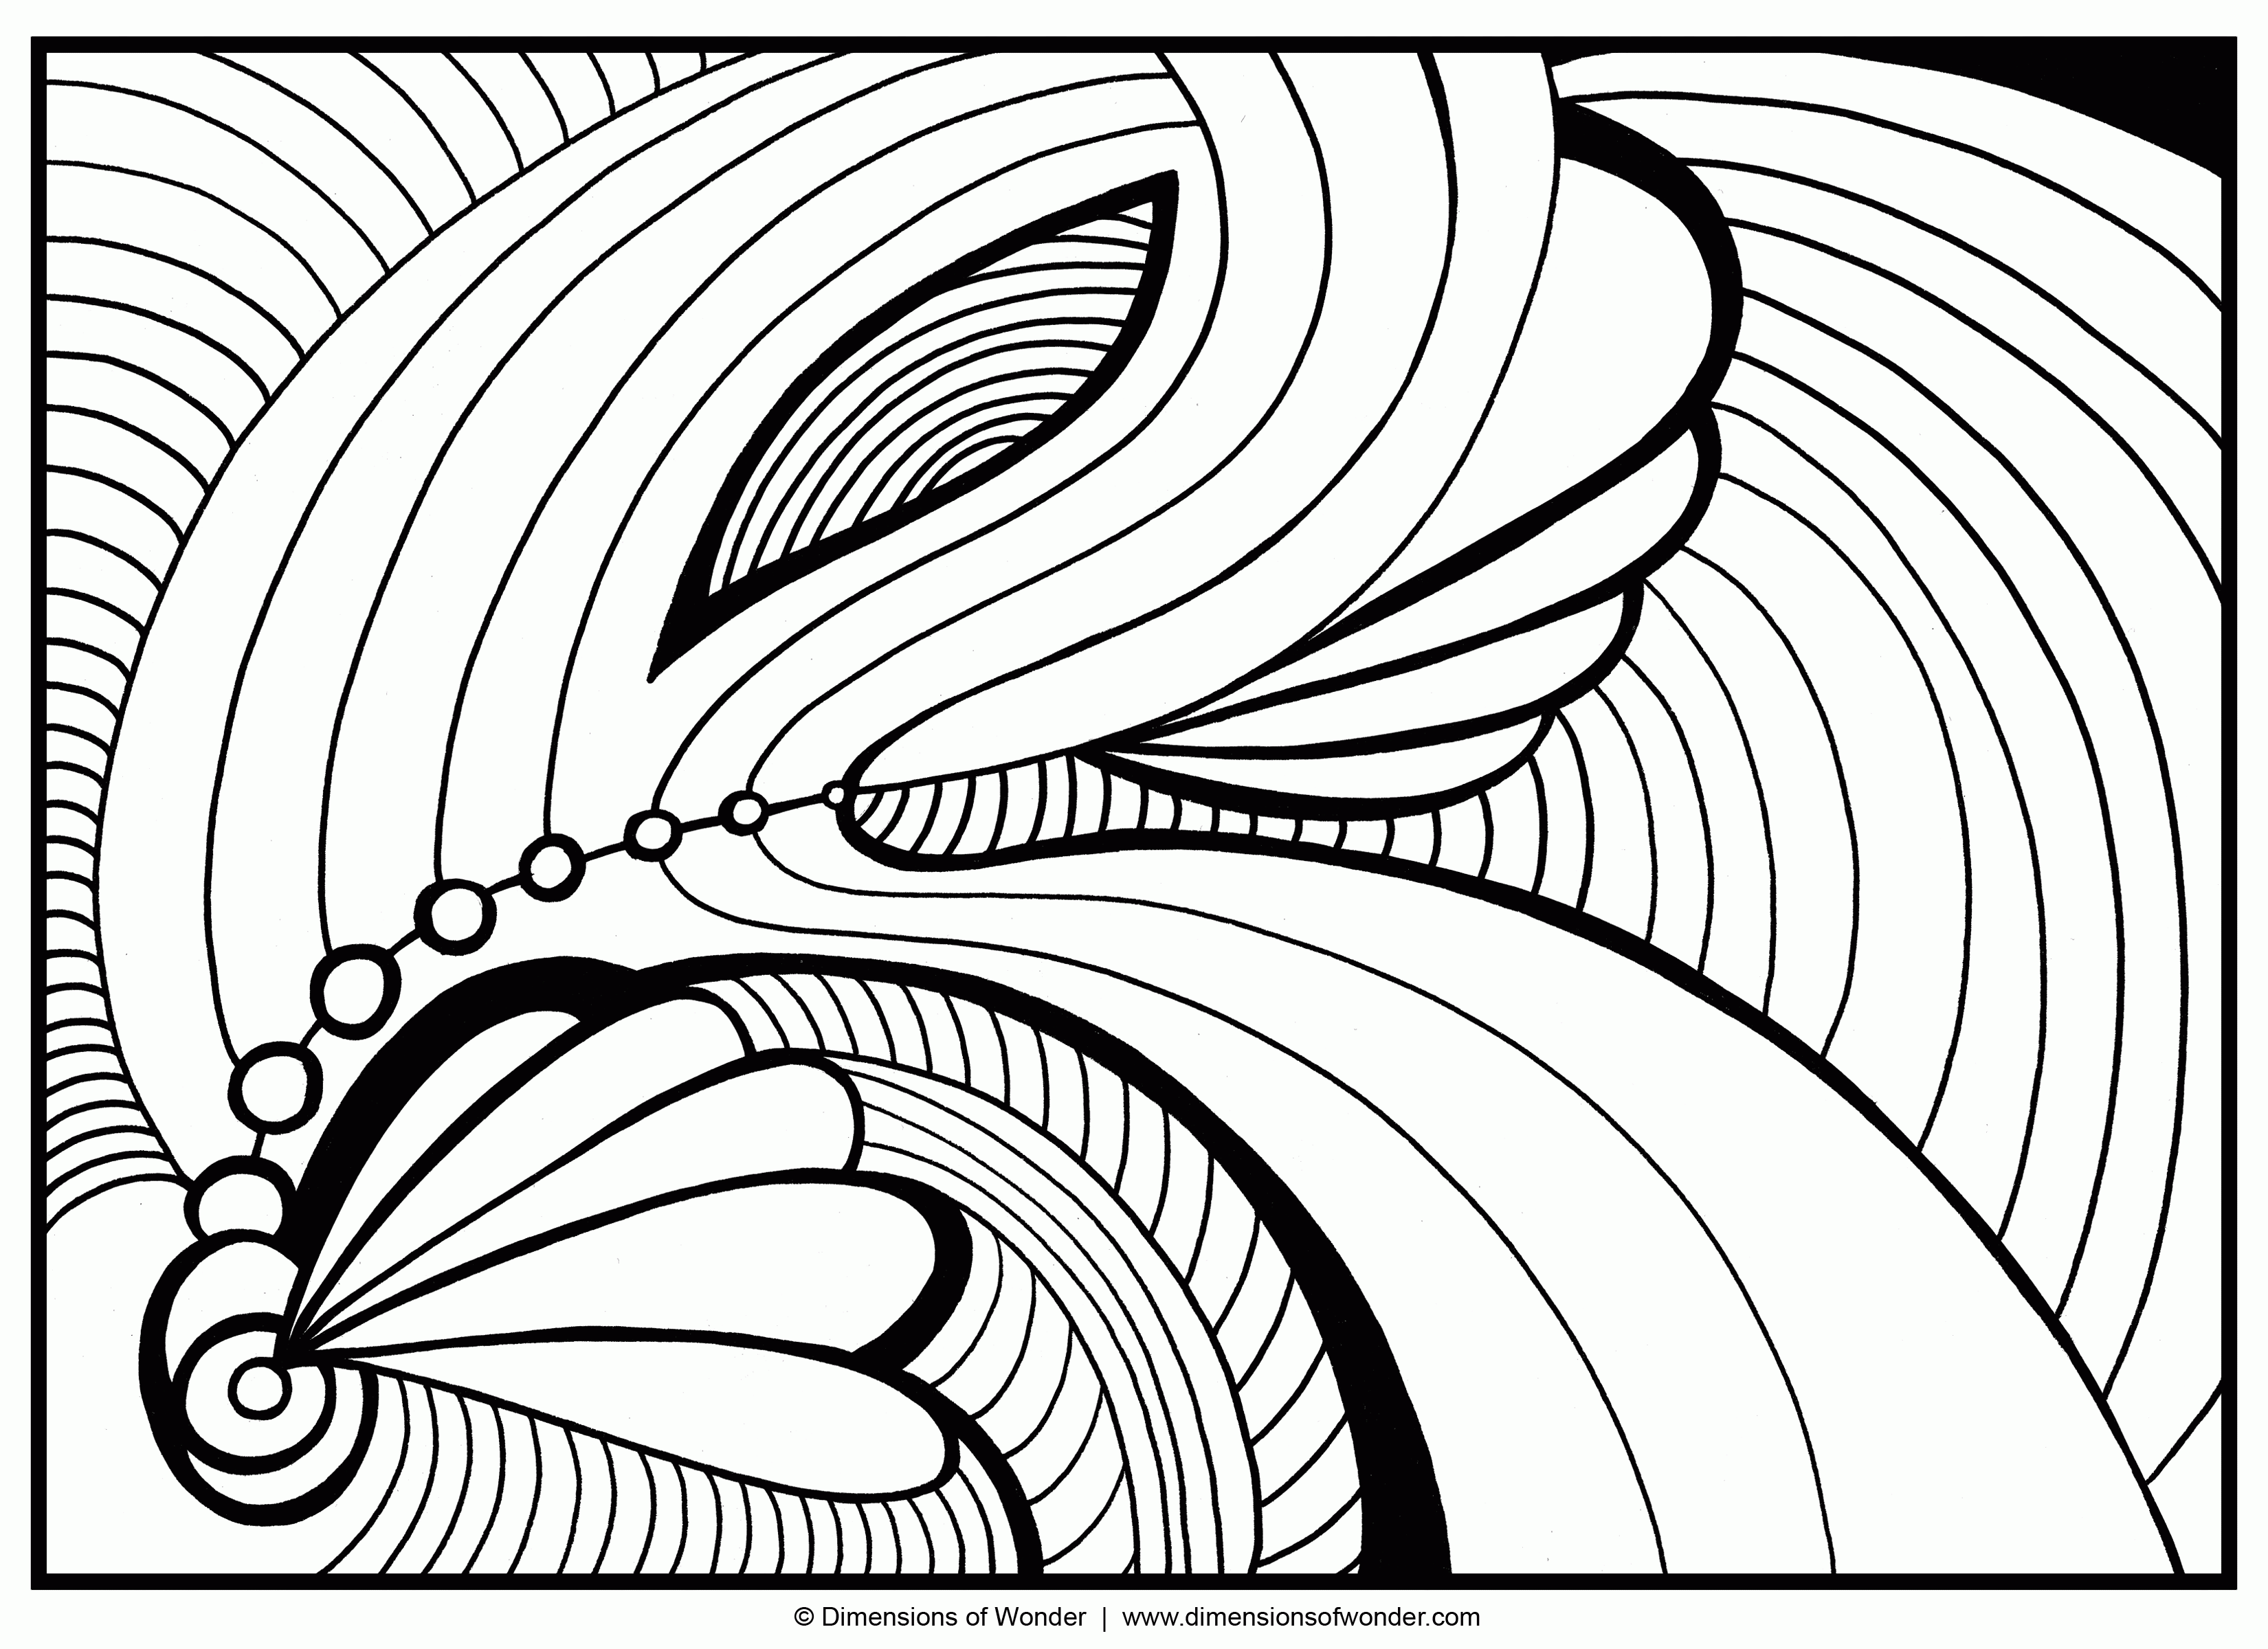 Free Printable Abstract Coloring Pages - VoteForVerde.com